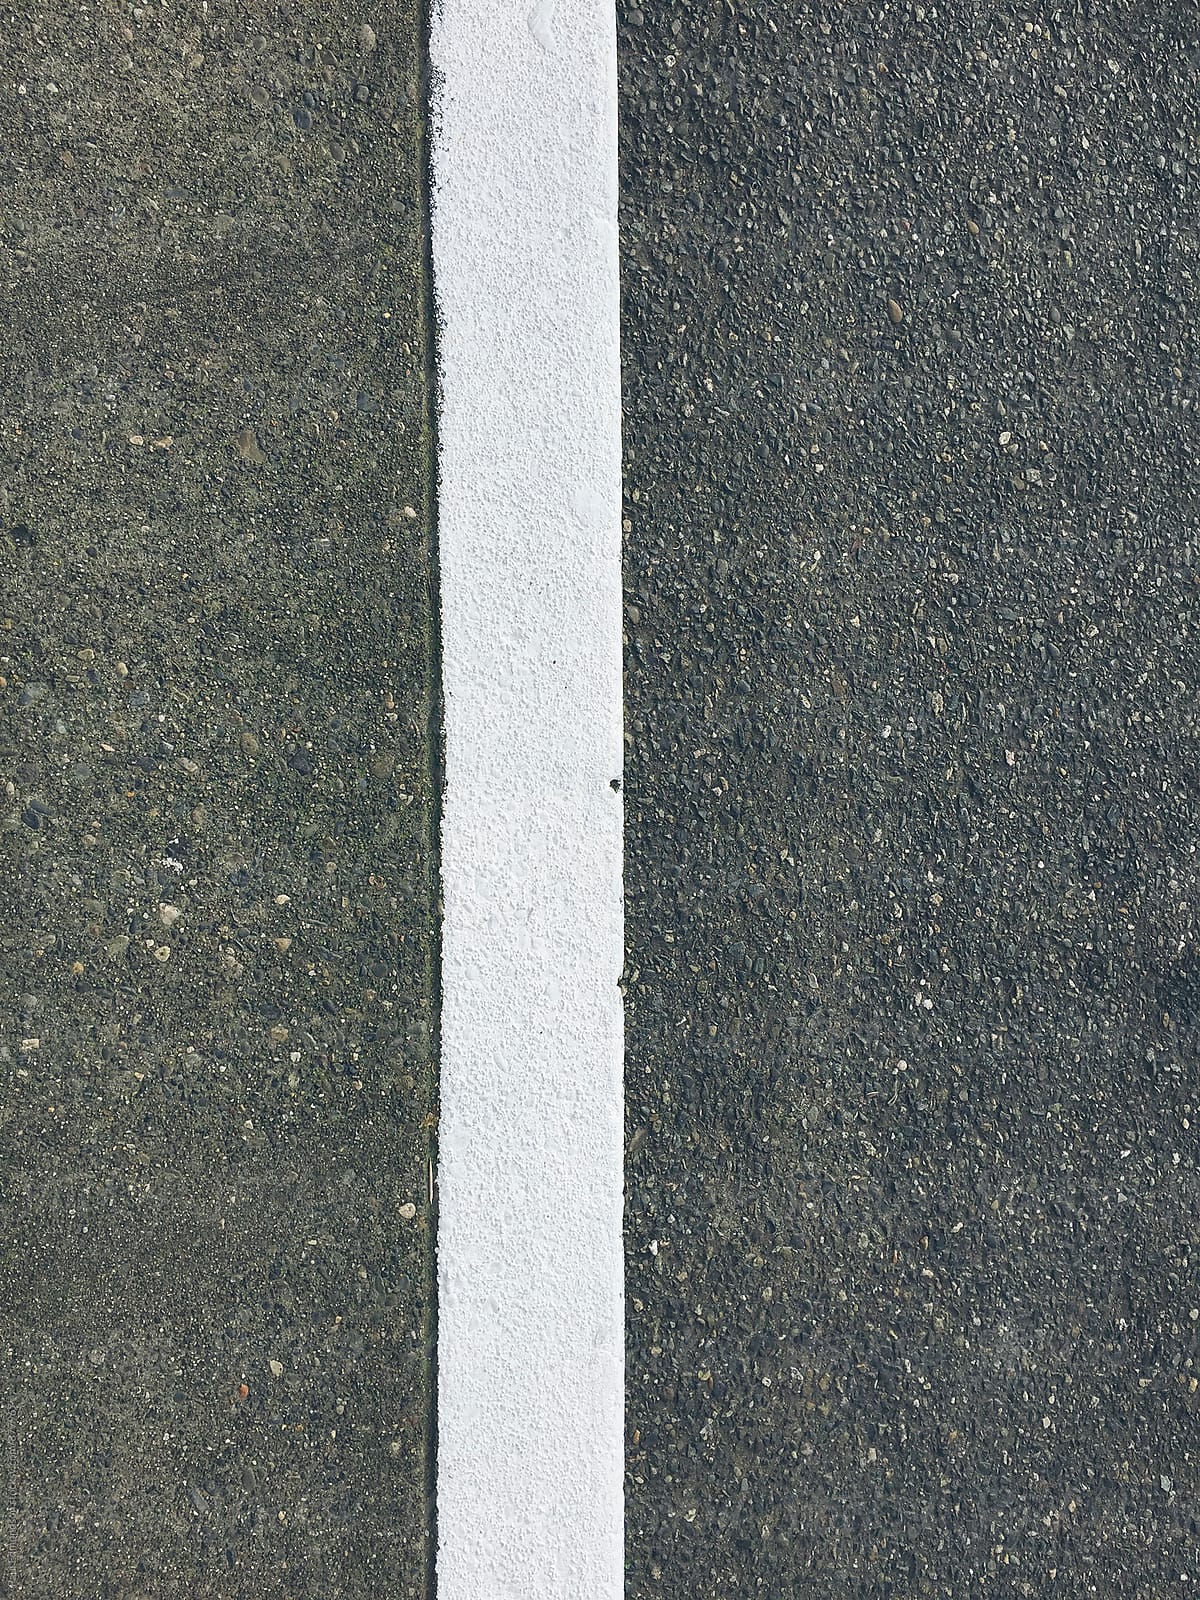 Close up of freshly painted street curb